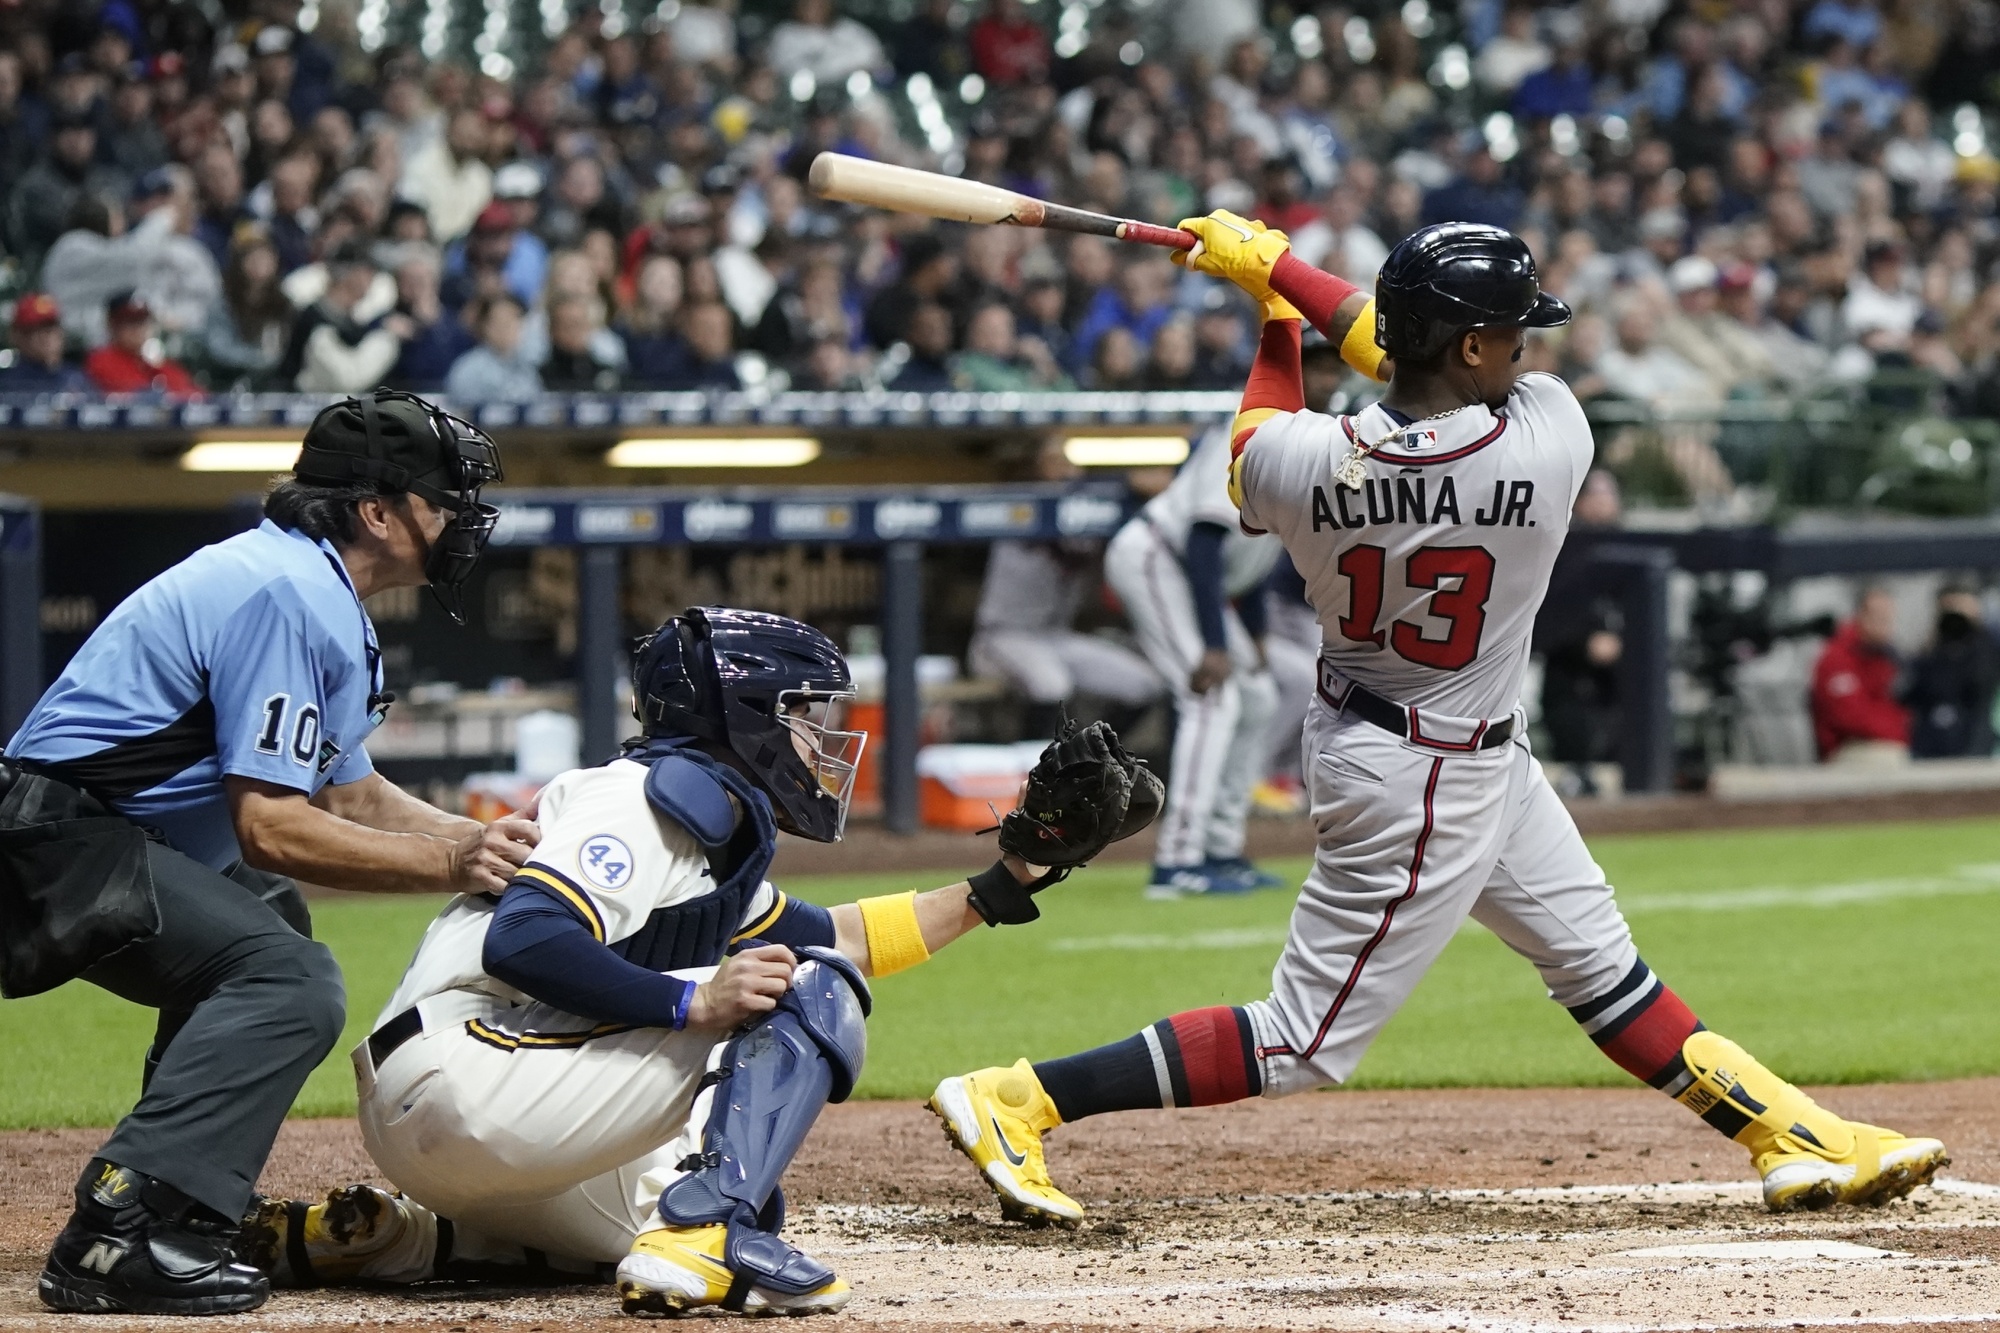 Acuna singles, scores in MLB debut, Braves beat Reds